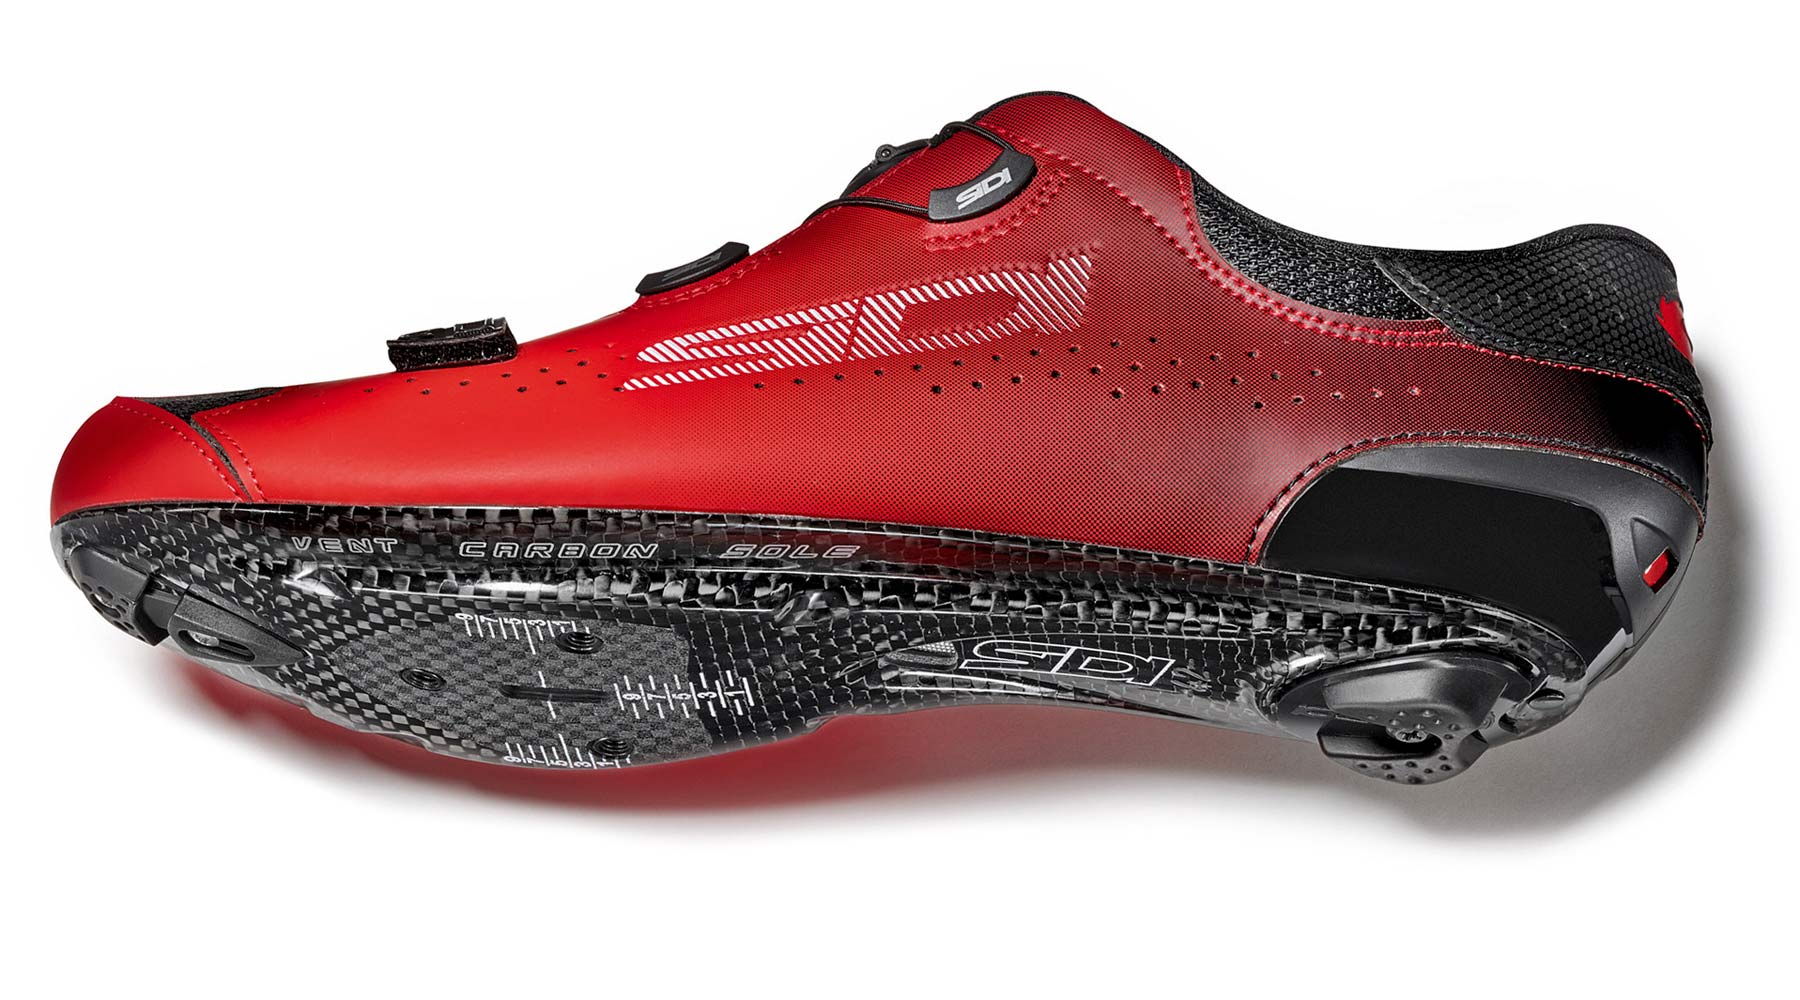 2020 Sidi Sixty carbon road shoes, lightweight high-performance carbon sole road bike shoes Sidi 60th anniversary edition